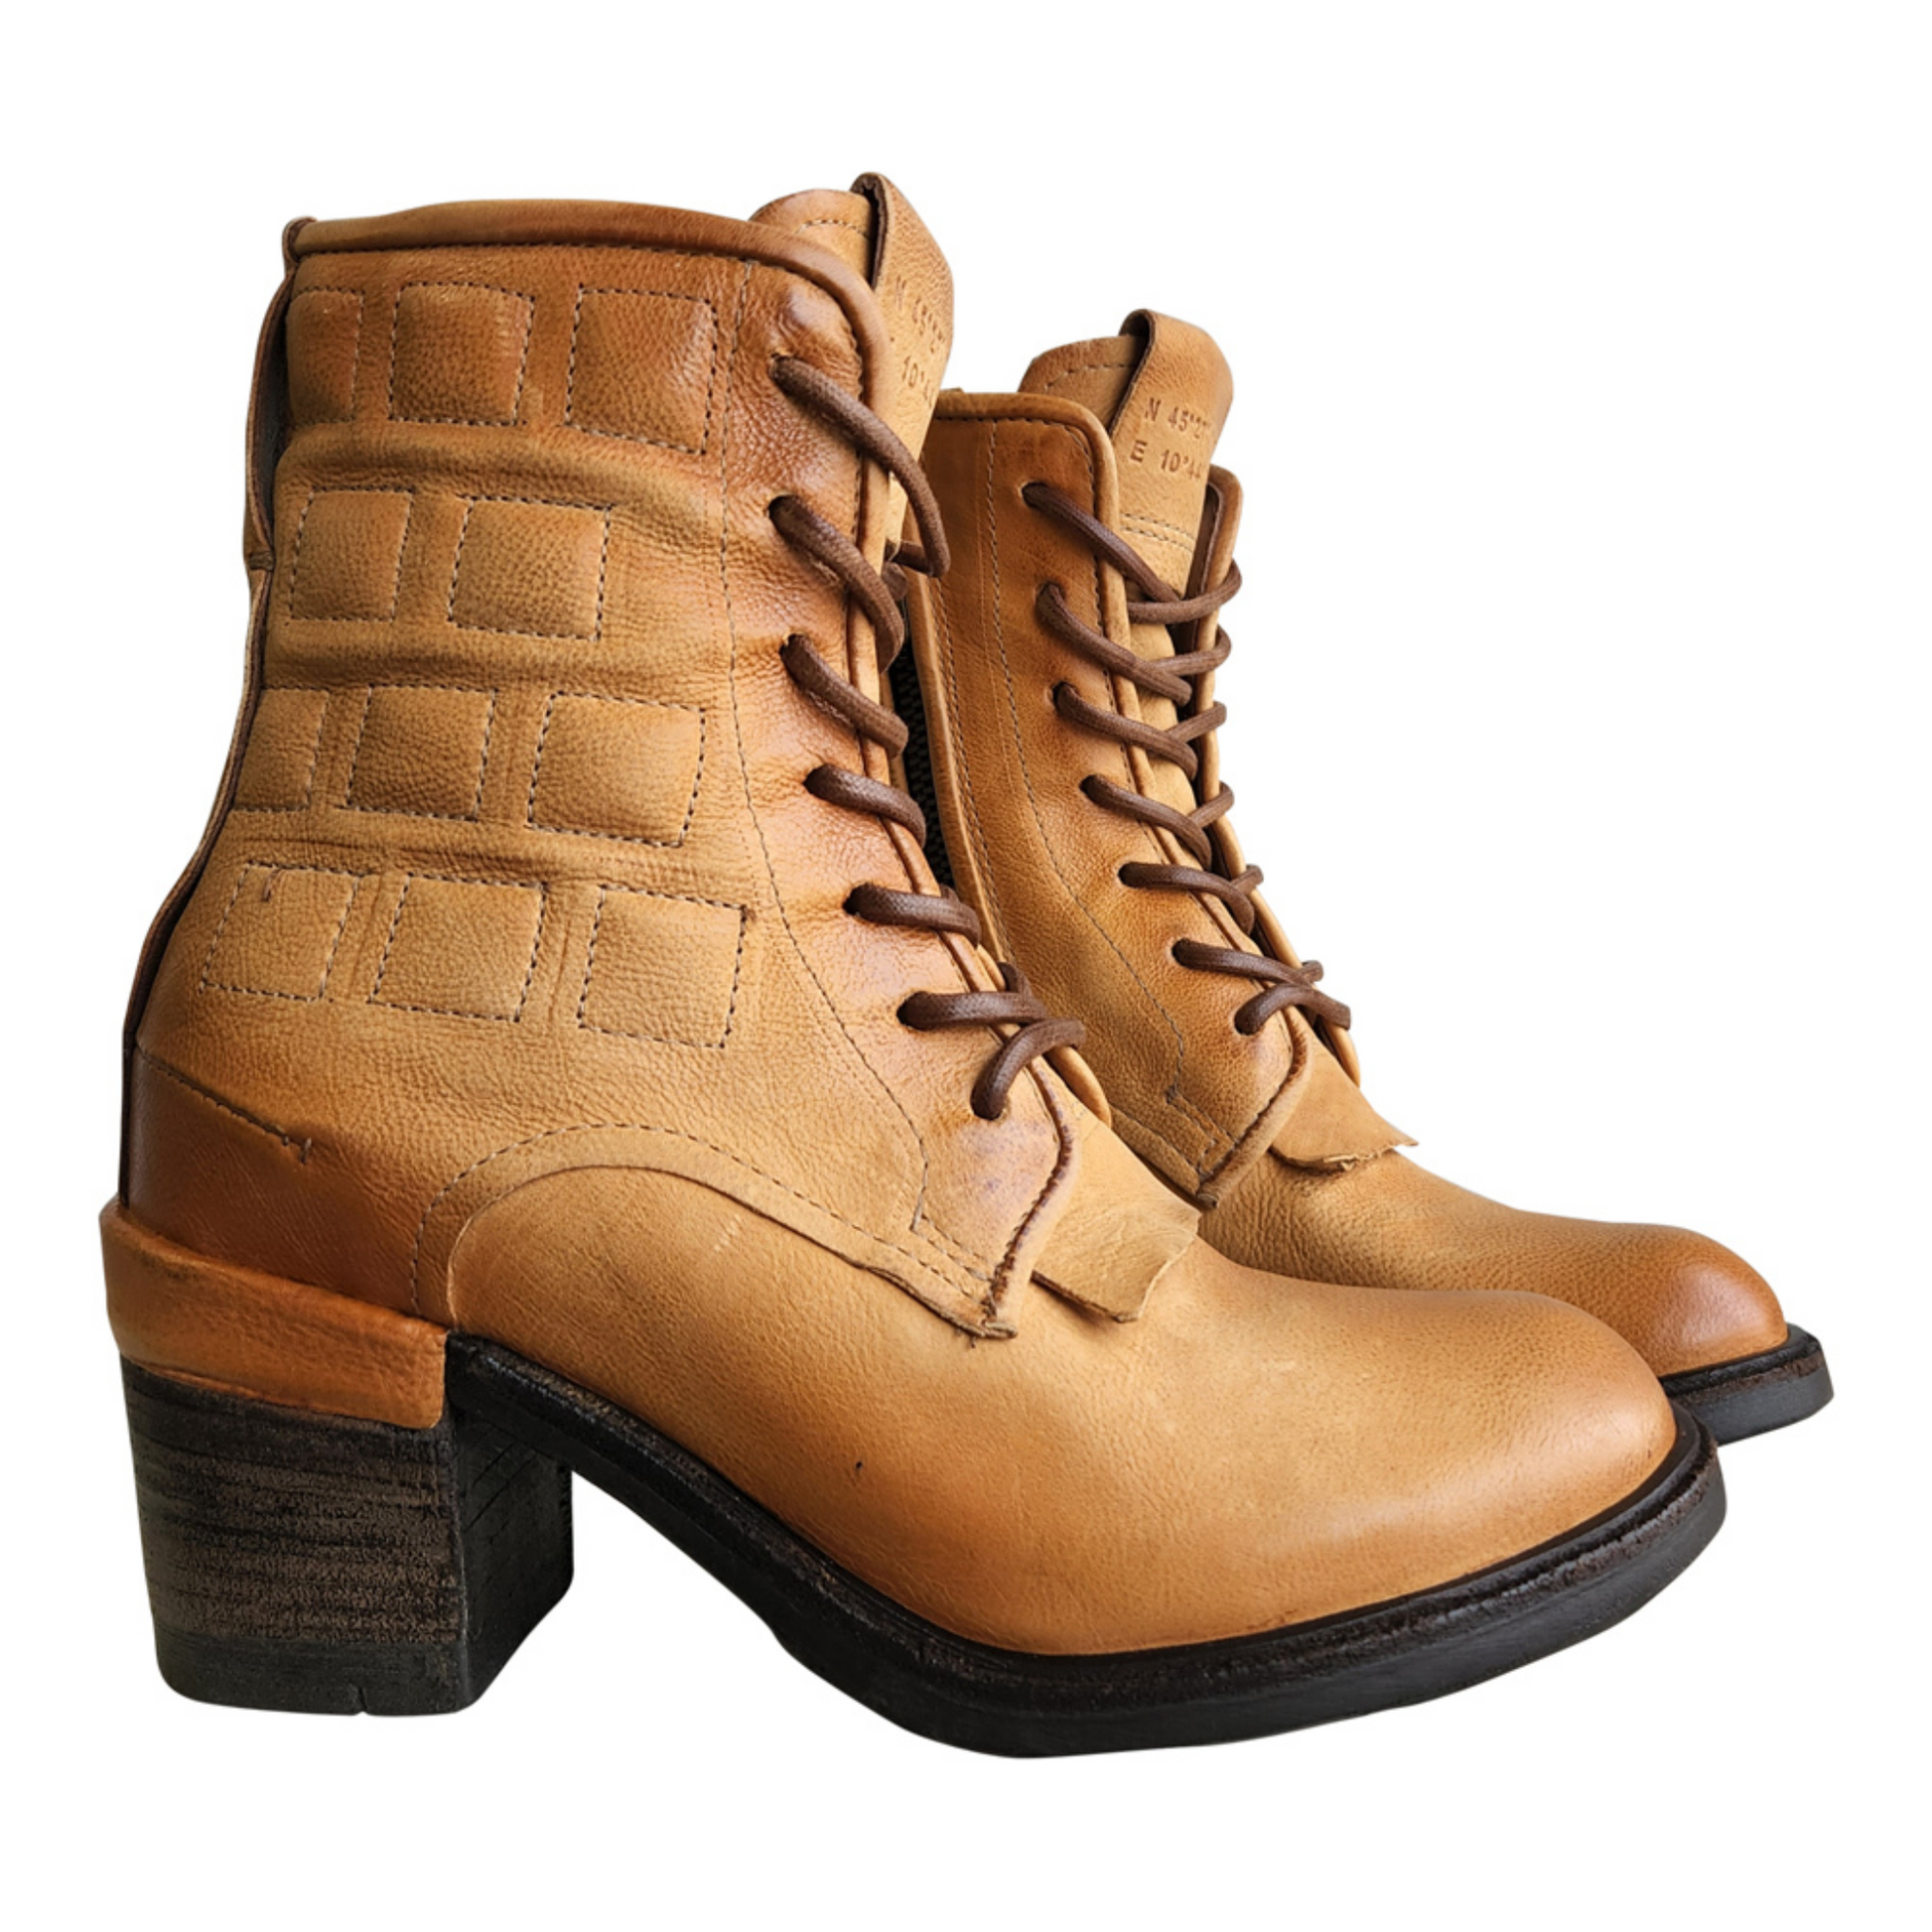 Side profile of a pair of A.S. 98 Florence Boots in the colour Nacho.